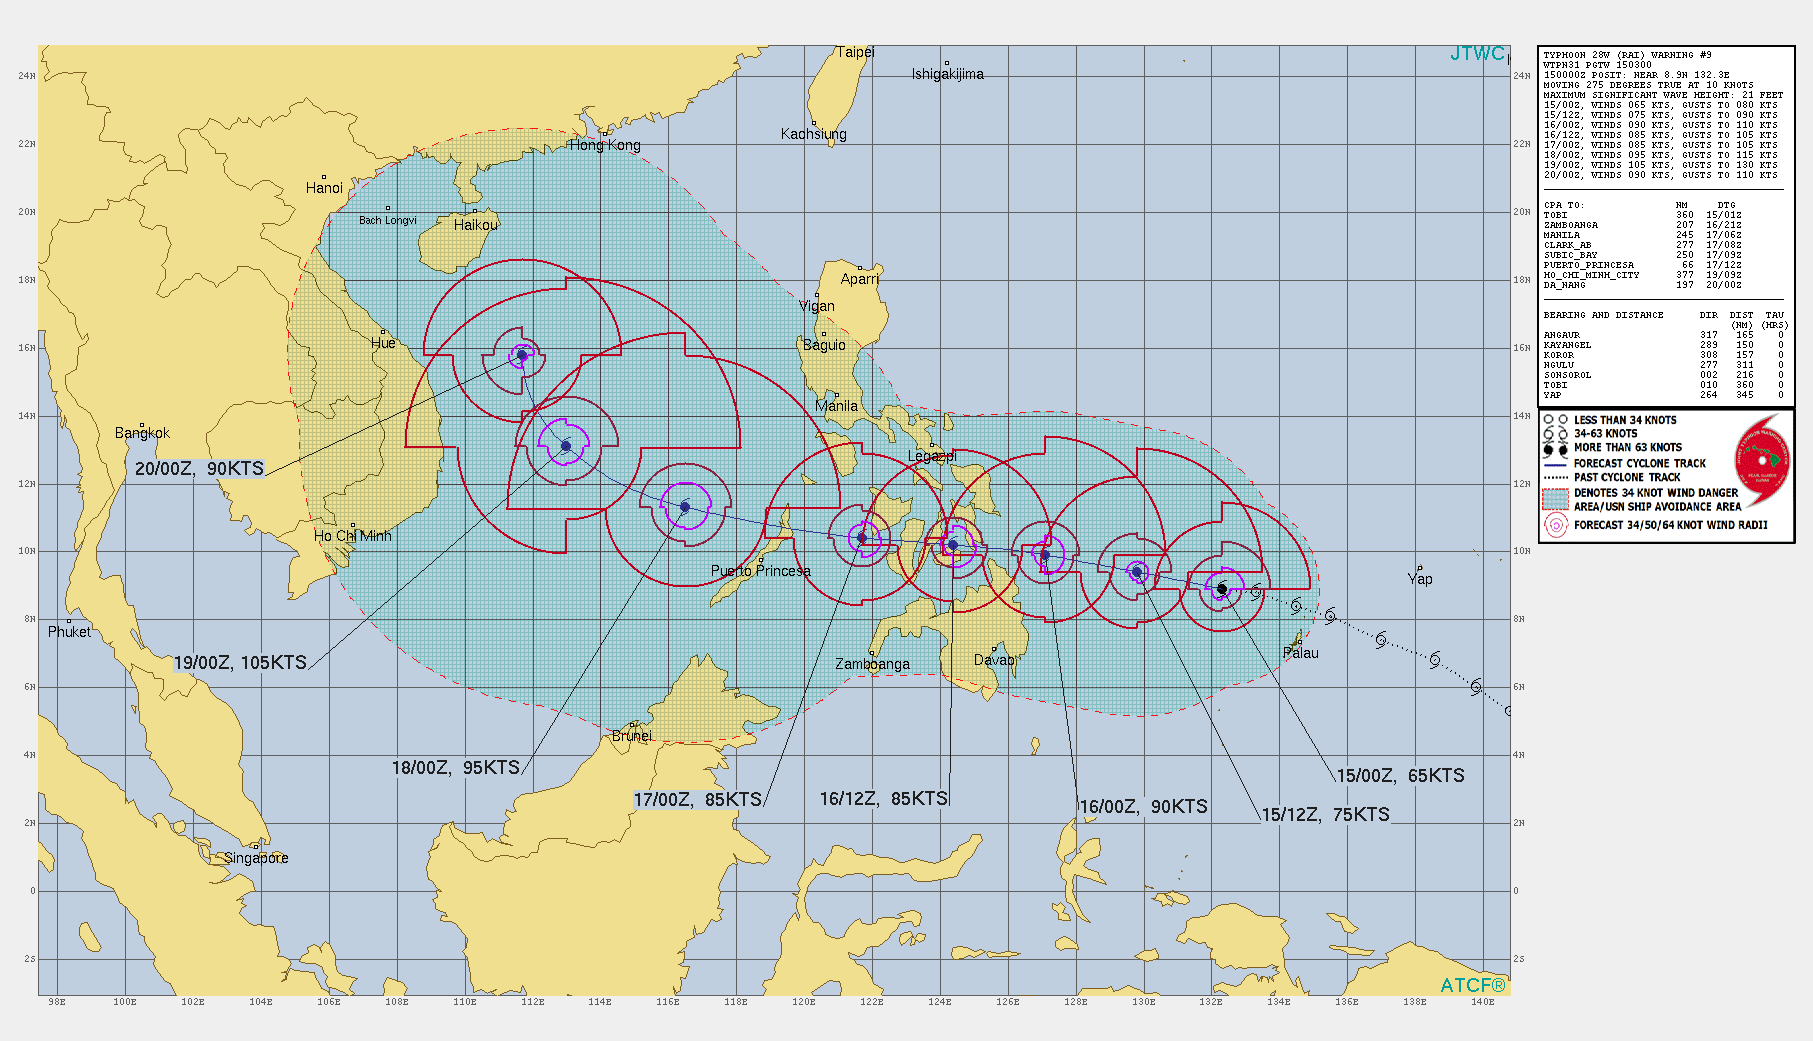 FORECAST REASONING.  SIGNIFICANT FORECAST CHANGES: THERE ARE NO SIGNIFICANT CHANGES TO THE FORECAST FROM THE PREVIOUS WARNING.  FORECAST DISCUSSION: TY RAI WILL CONTINUE ON ITS CURRENT TRACK, MAKING LANDFALL OVER SURIGAO, PHILIPPINES, JUST AFTER 24H, TRACK ACROSS THE ARCHIPELAGO, AND EXIT INTO THE SOUTH CHINA SEA (SCS) SHORTLY AFTER 48H. THE POSSIBILITY OF RAPID INTENSIFICATION REMAINS BEFORE LANDFALL WITH A PEAK INTENSITY SET AT 90 KTS/CAT 2 BY 24H. AFTERWARD, INTERACTION WITH THE PHILIPPINE ISLANDS WILL SLIGHTLY ERODE THE SYSTEM TO 85 KTS/CAT 2 AS IT EXITS INTO THE SCS. THE WARM SST IN THE SCS AND CONTINUED LOW VERTICAL WIND SHEAR (VWS), AND GOOD POLEWARD OUTFLOW WILL PROMOTE A PEAK OF 105 KTS/CAT 3 BY 96h. AFTERWARD, THE INFLUX OF COLD DRY AIR ASSOCIATED WITH A NORTHEASTERLY WIND SURGE IN THE SCS WILL BEGIN TO WEAKEN THE SYSTEM DOWN TO 90 KTS BY 120H.